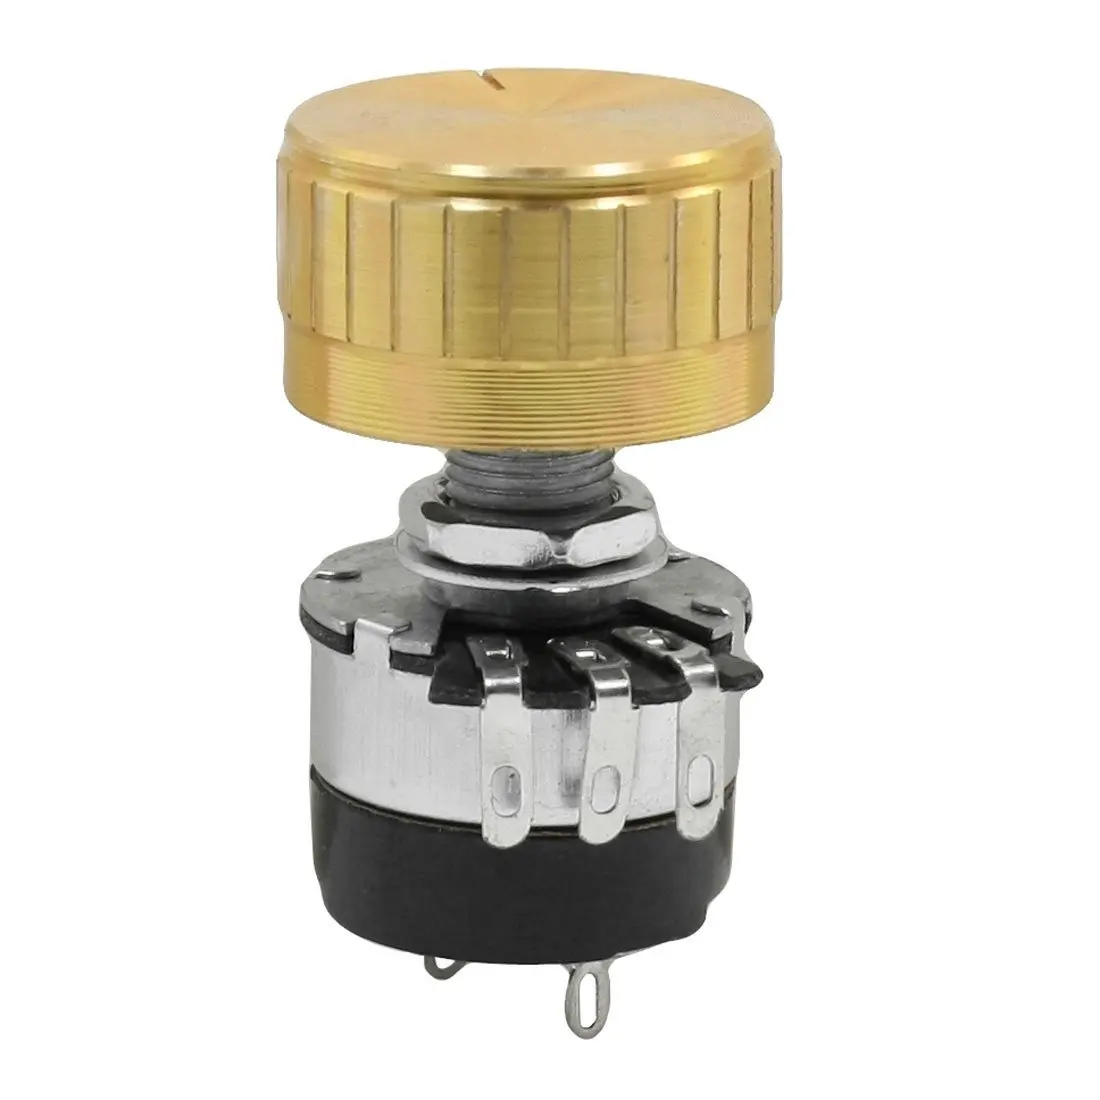 

On/Off Switch Rotary Carbon Film Potentiometer 470K Ohm 5% WTH134-2